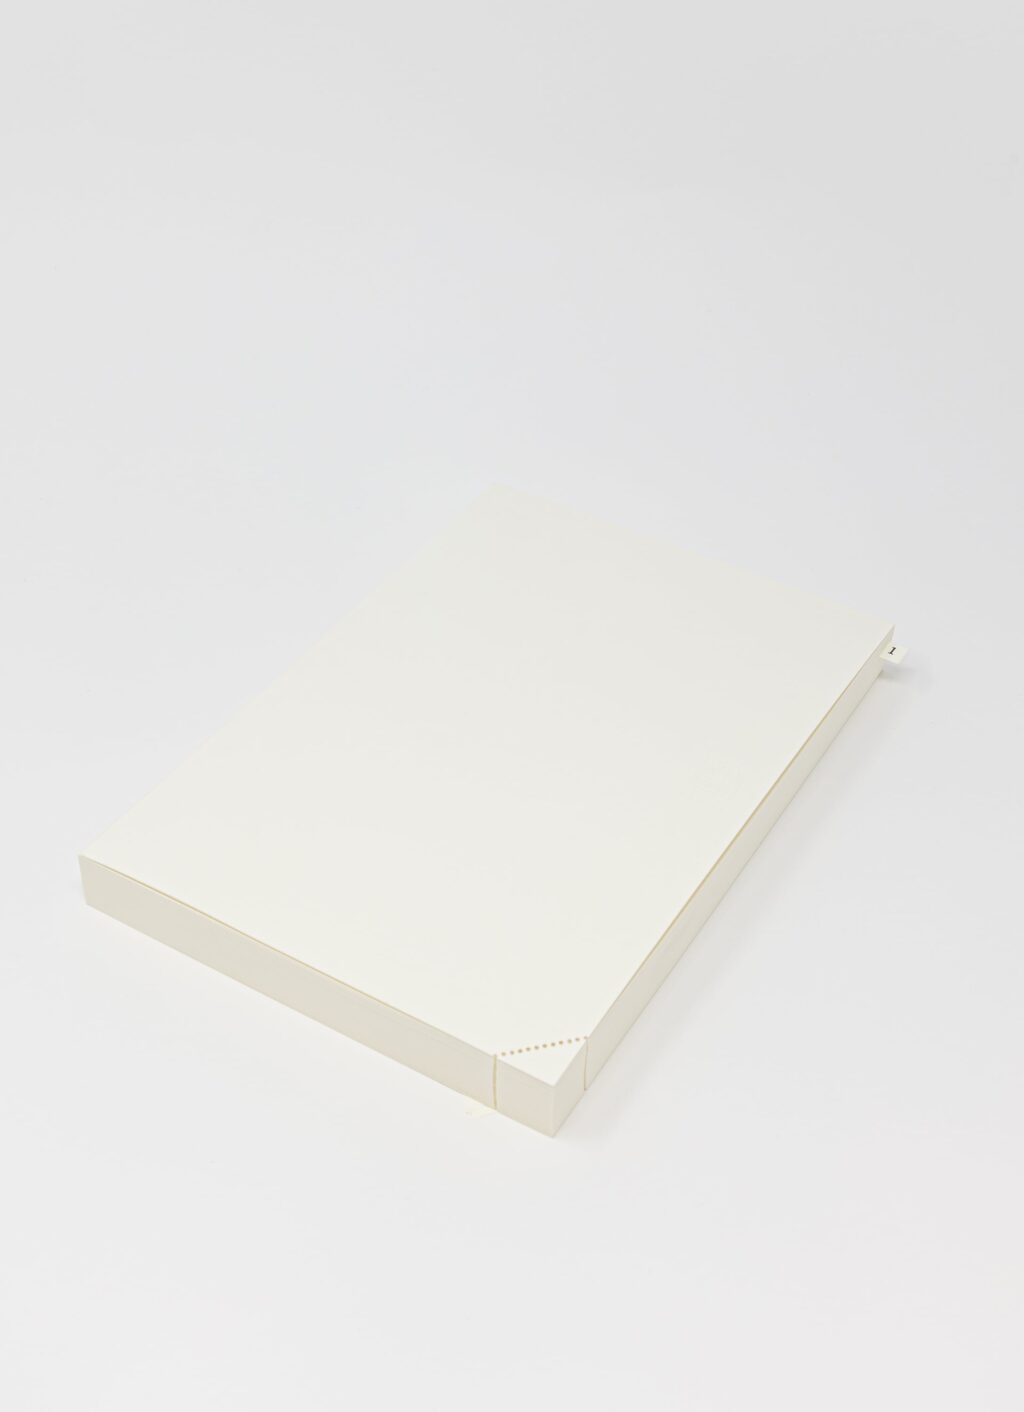 Midori - Notebook - DIN A5 - Codex - Blank with transp. Cover